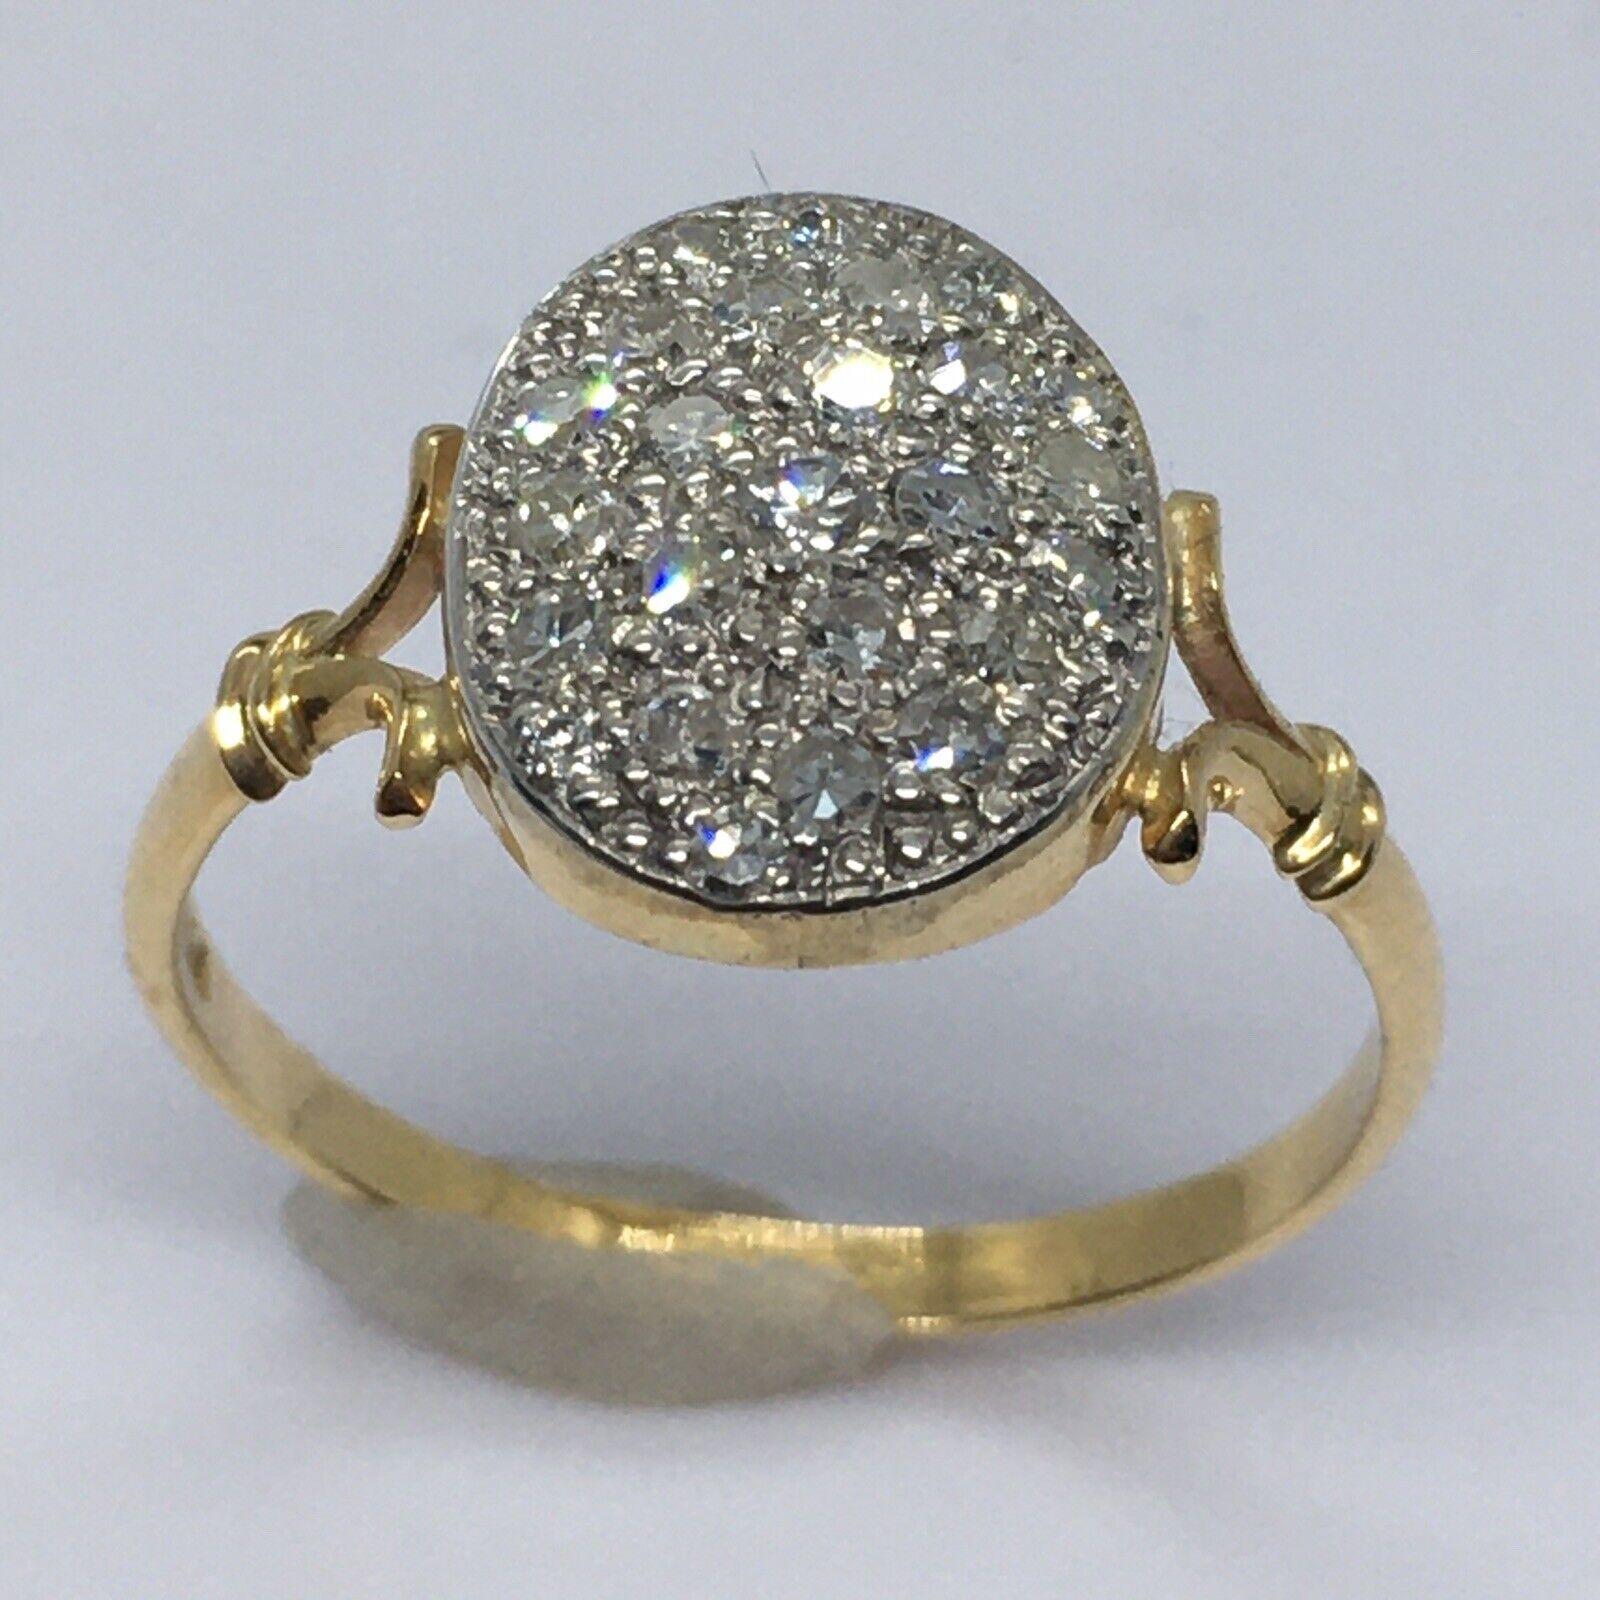 
18k Yellow Gold Antique Silver Top 1/2 Carat Diamond Pave Set Ring 

100 yrs of age
 Size 7.5 +  just a bit over 7.5
Marked 750 tested for 18K
26 pieces of single cut diamonds 1/2 carat total
weighting 2.5 gram 
1/2 inch span on top
Split shank